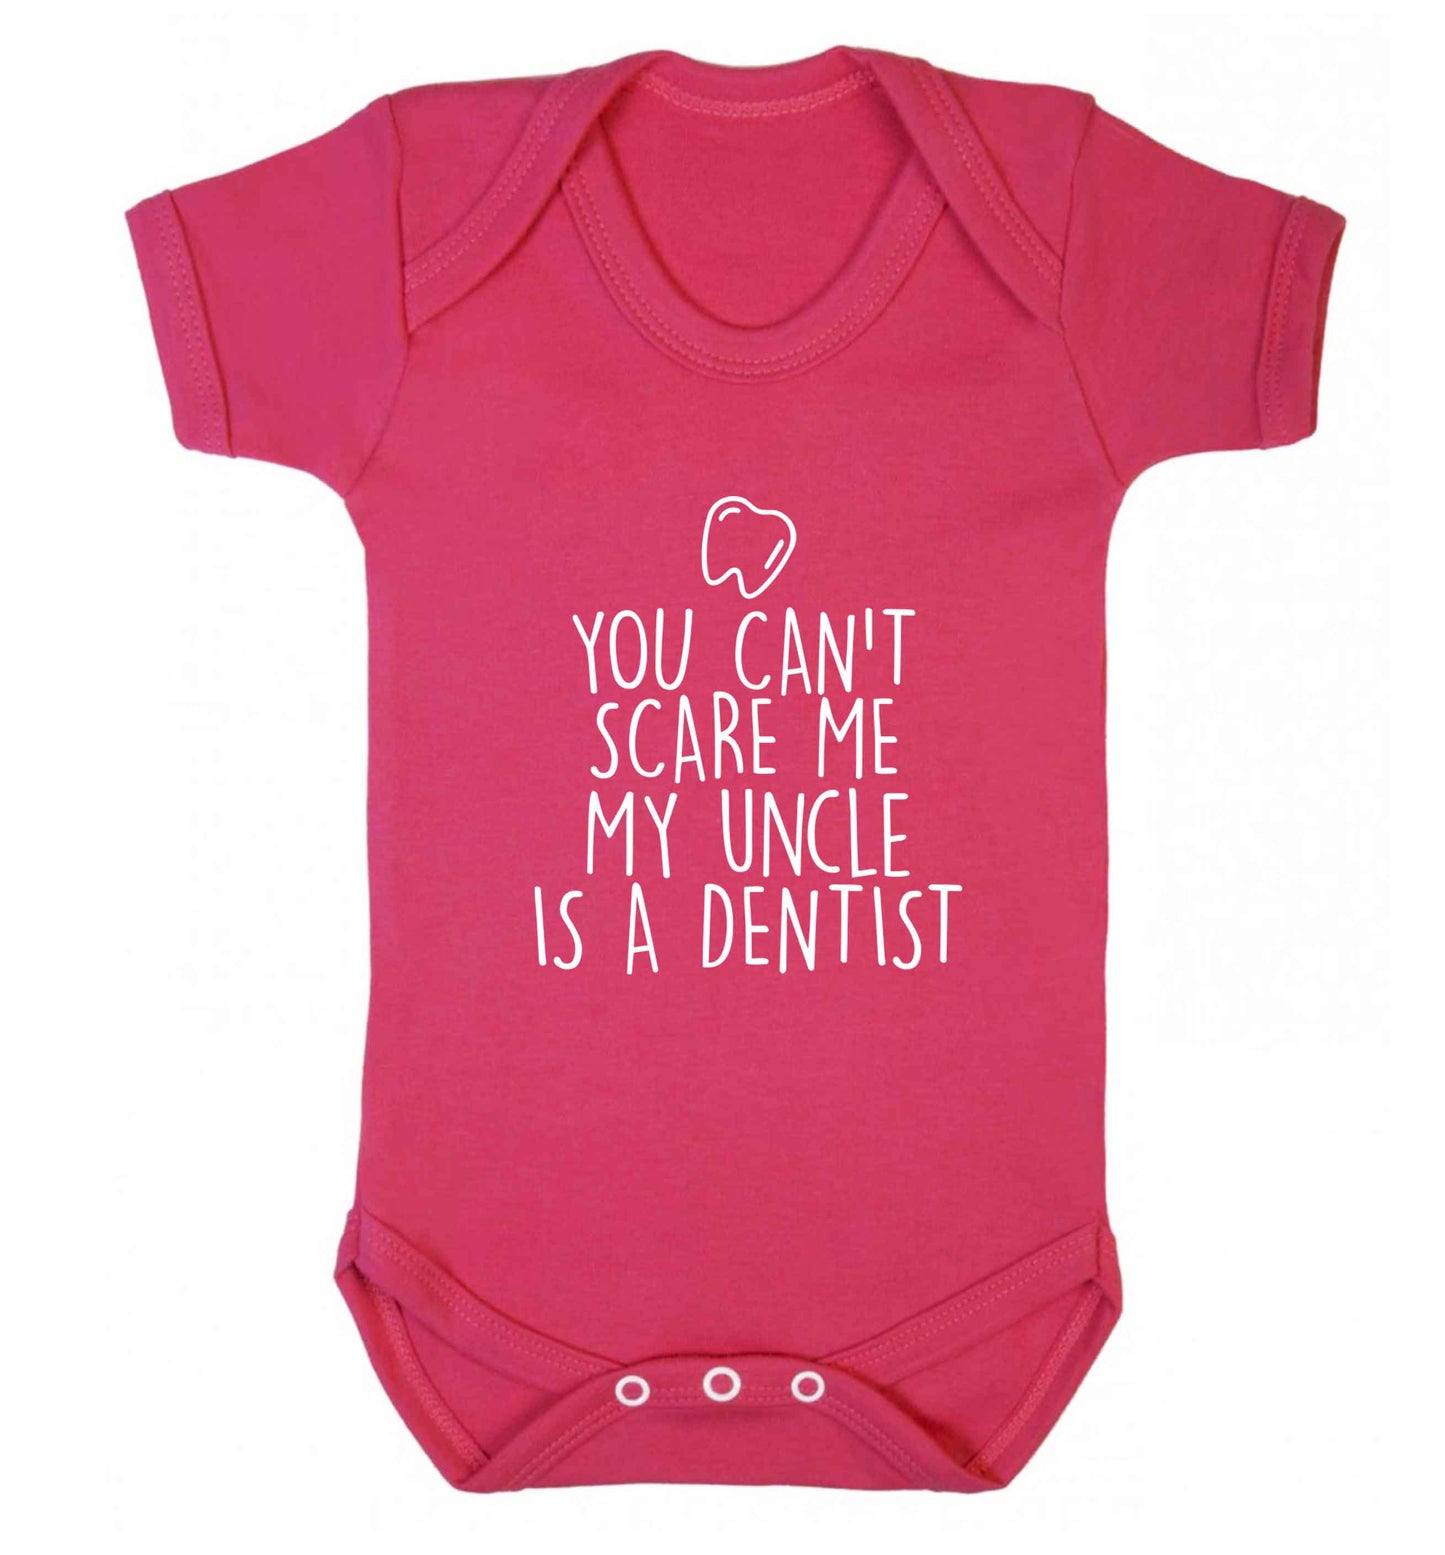 You can't scare me my uncle is a dentist baby vest dark pink 18-24 months